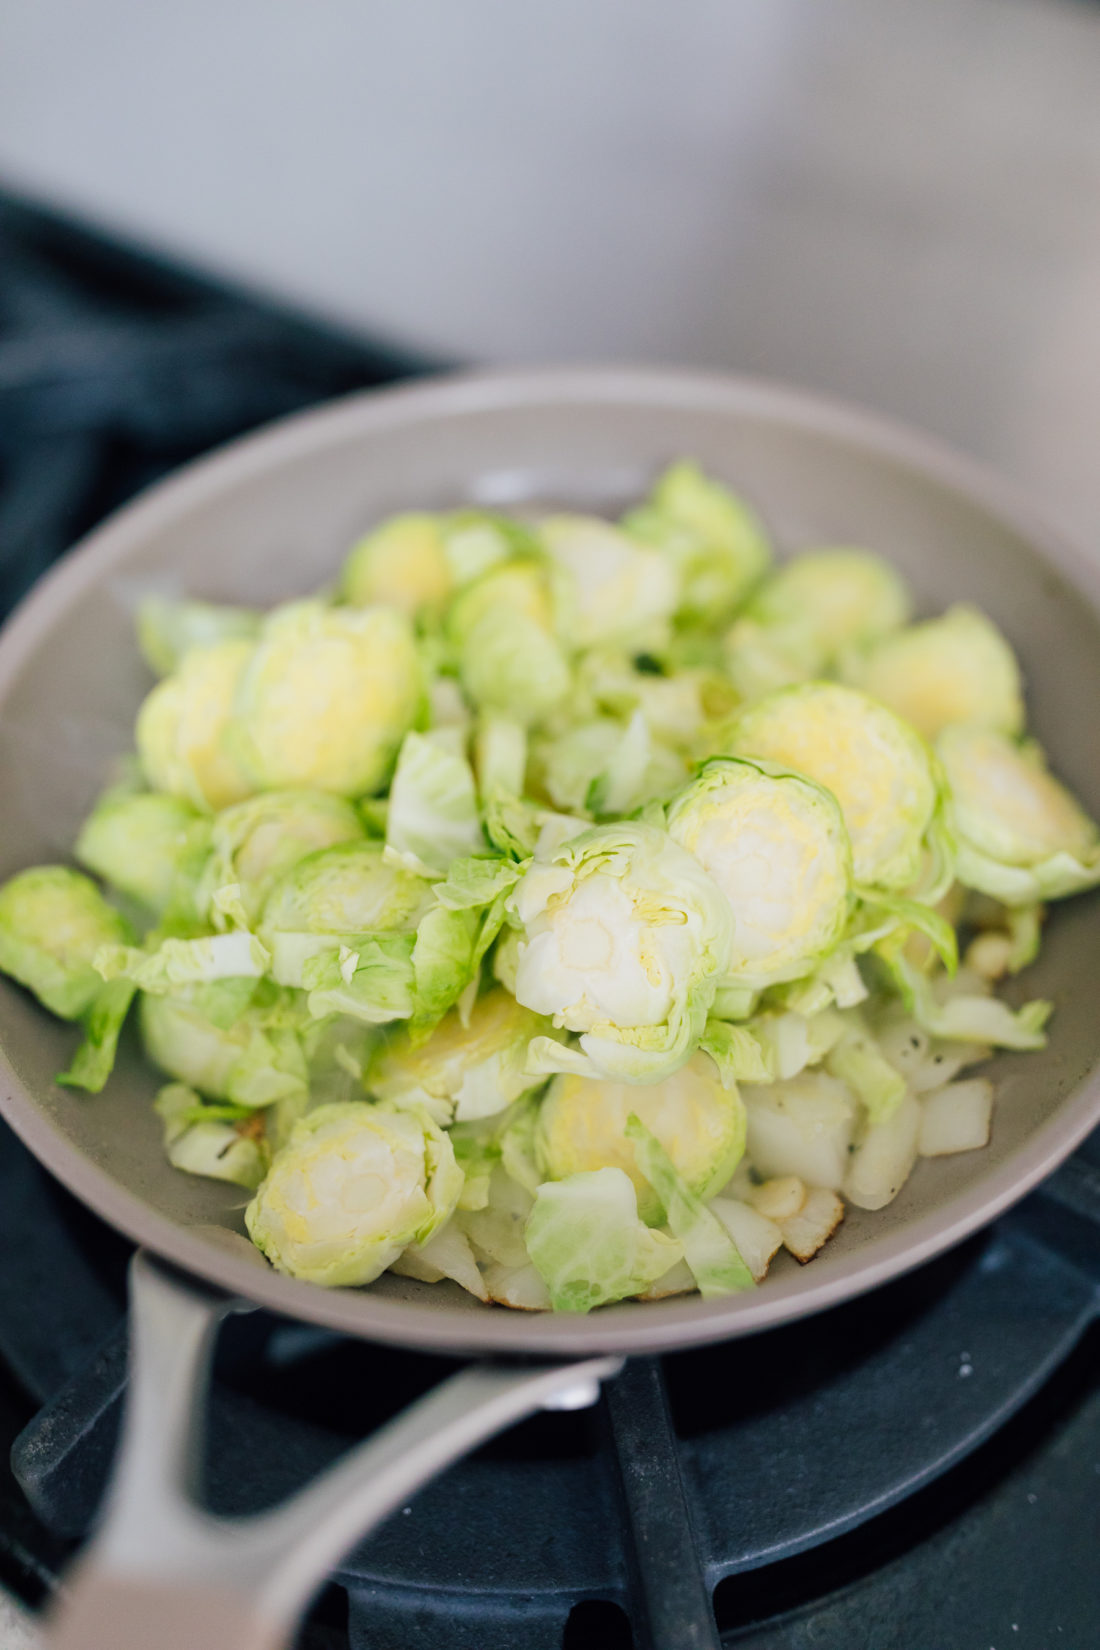 Eva Amurri Martino preps her Brussels Sprouts side dish in her kitchen in Connecticut